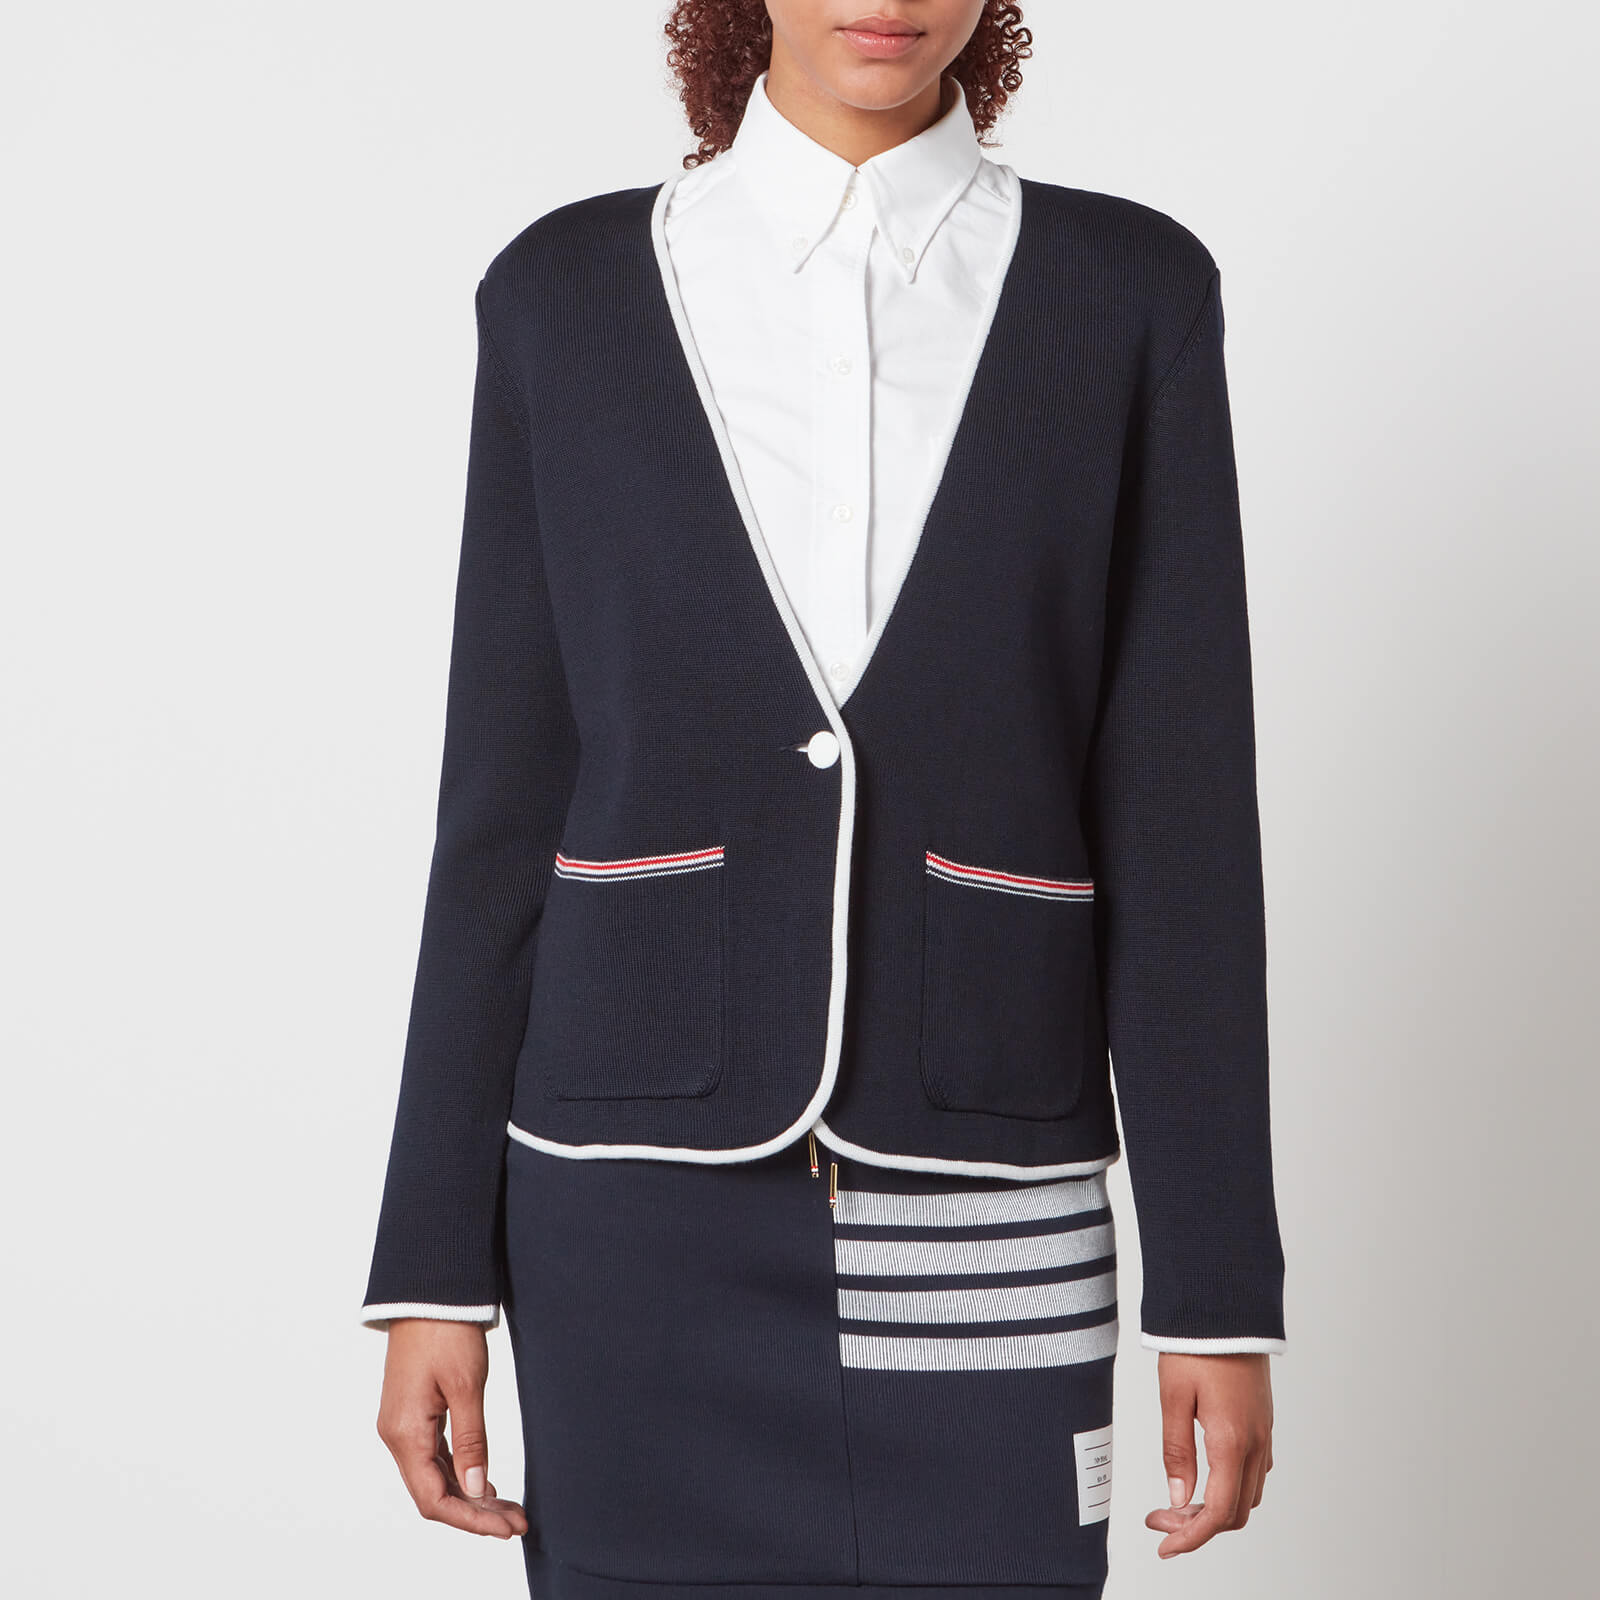 Thom Browne Women's Double Faced Single Breasted Collarless Jacket - Navy - IT 38/UK 6